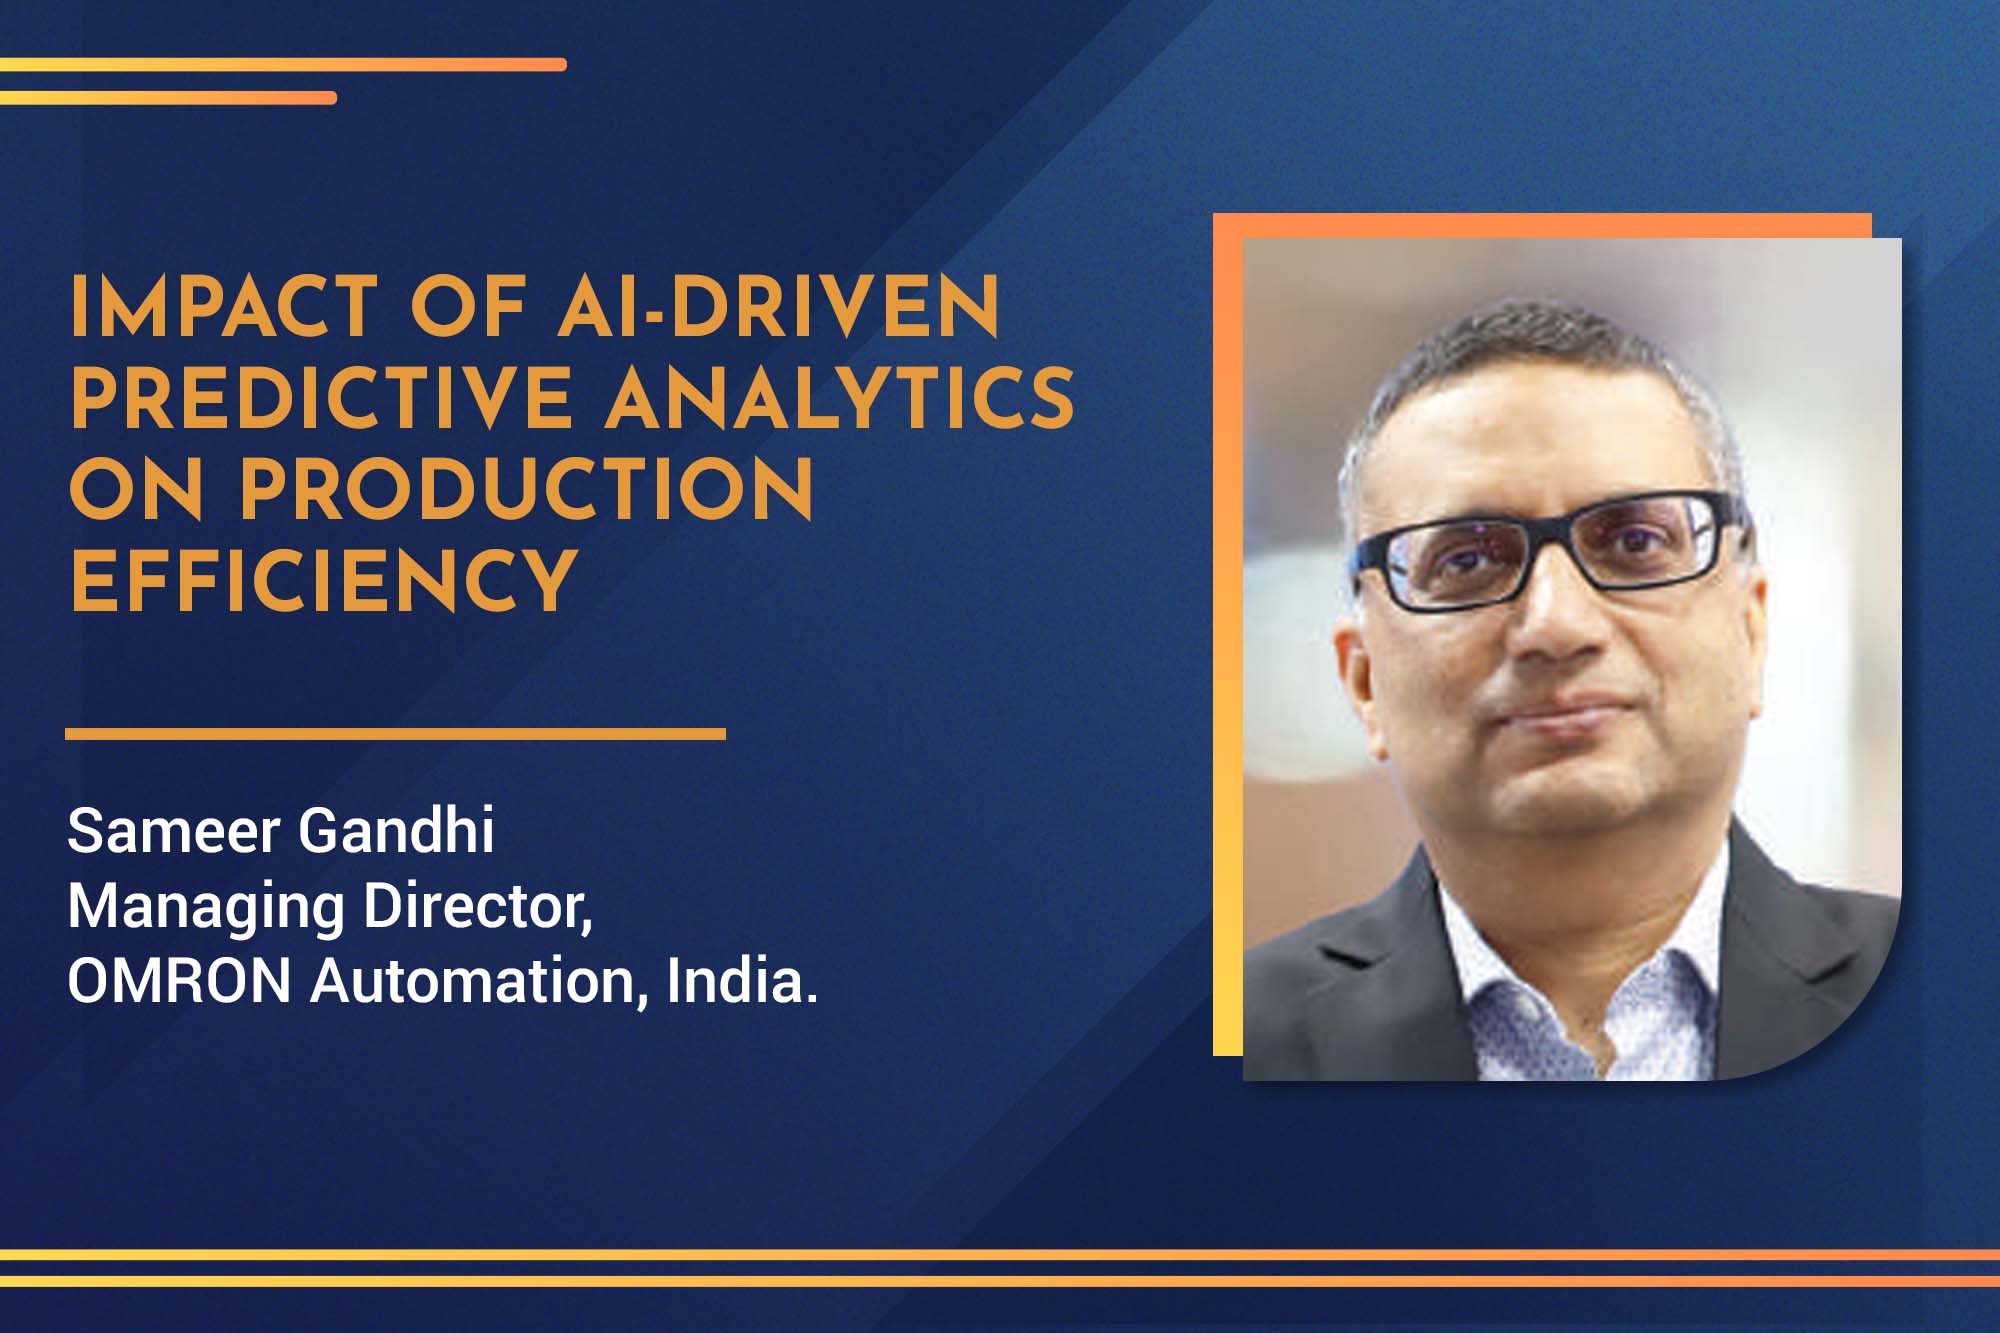 Impact of AI-driven predictive analytics on production efficiency